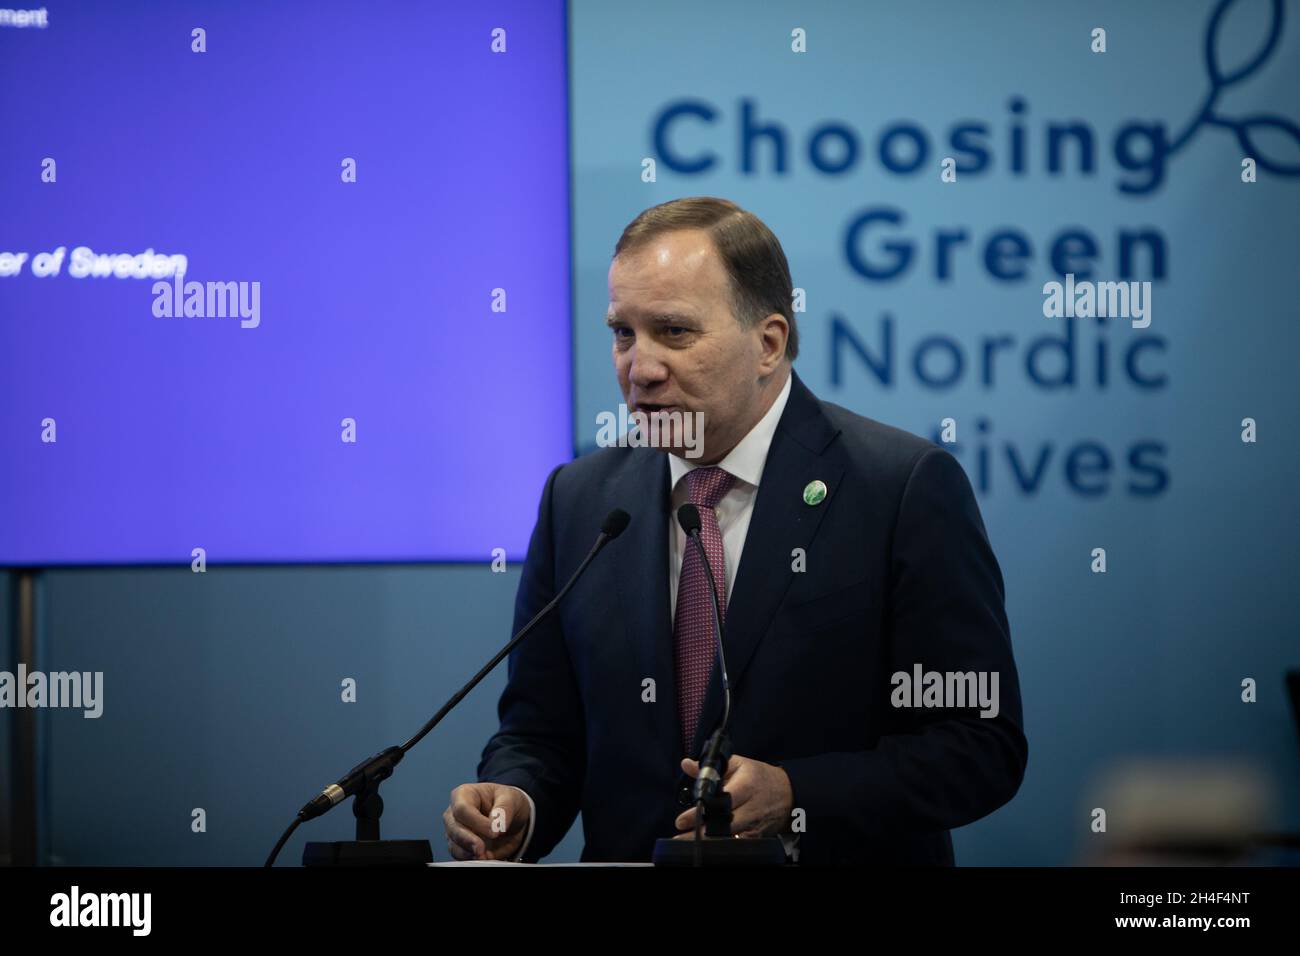 Glasgow, UK. Stefan Löfven, Prime Minister of Sweden, speaking at a Nordic Countries meeting, at the 26th UN Climate Change Conference, known as COP26, in Glasgow, Scotland, on 2 November 2021. Photo: Jeremy Sutton-Hibbert/Alamy Live News, Stock Photo